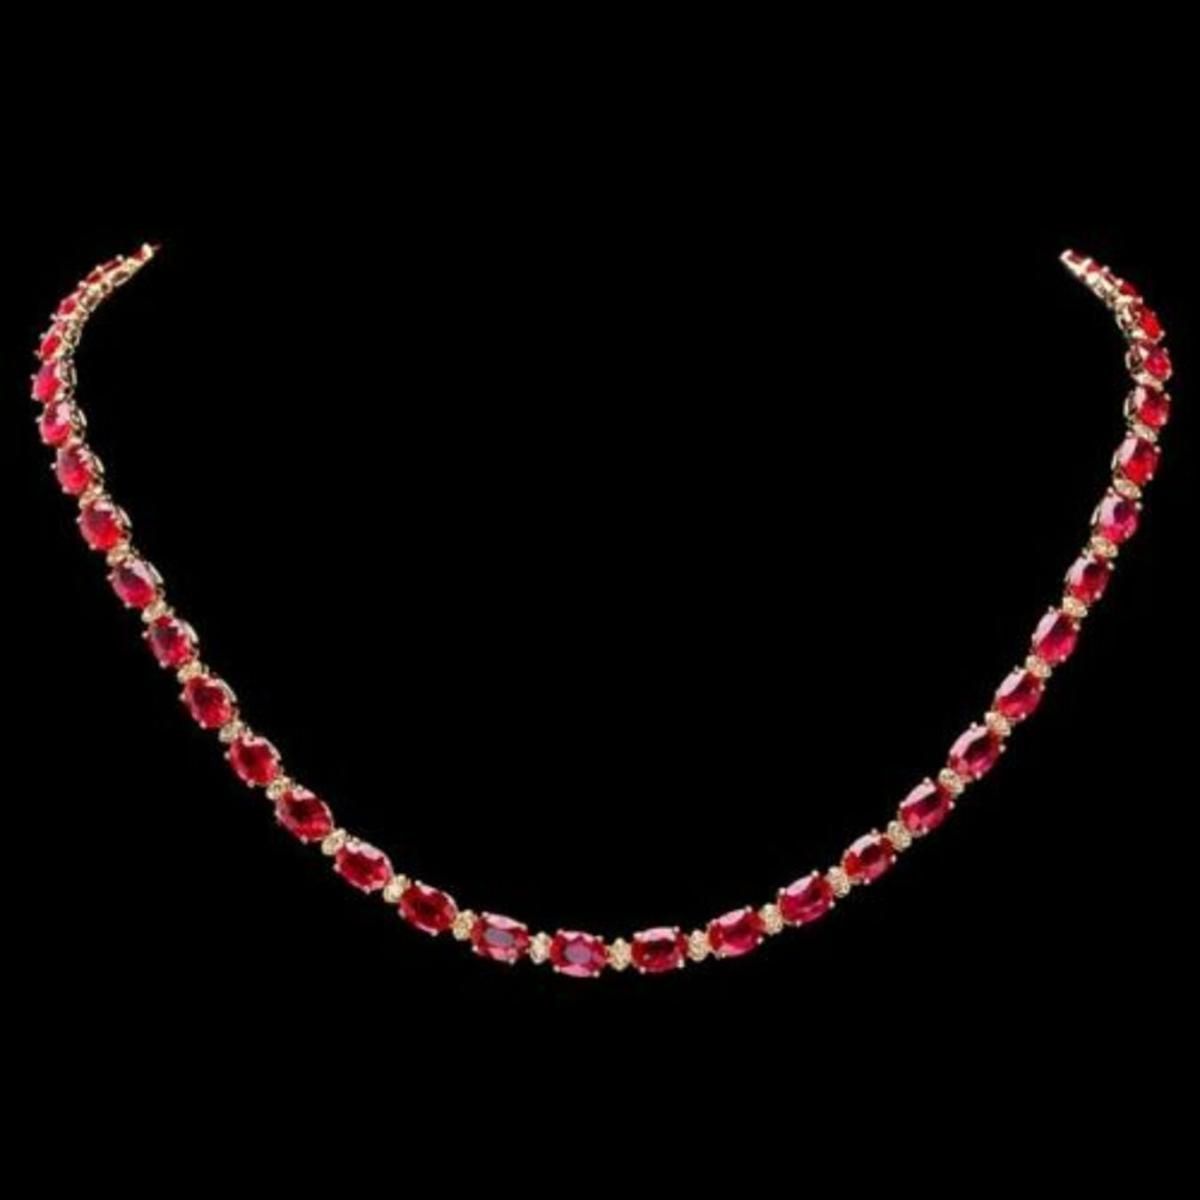 14K Yellow Gold 43.25ct Ruby and 1.15ct Diamond Necklace